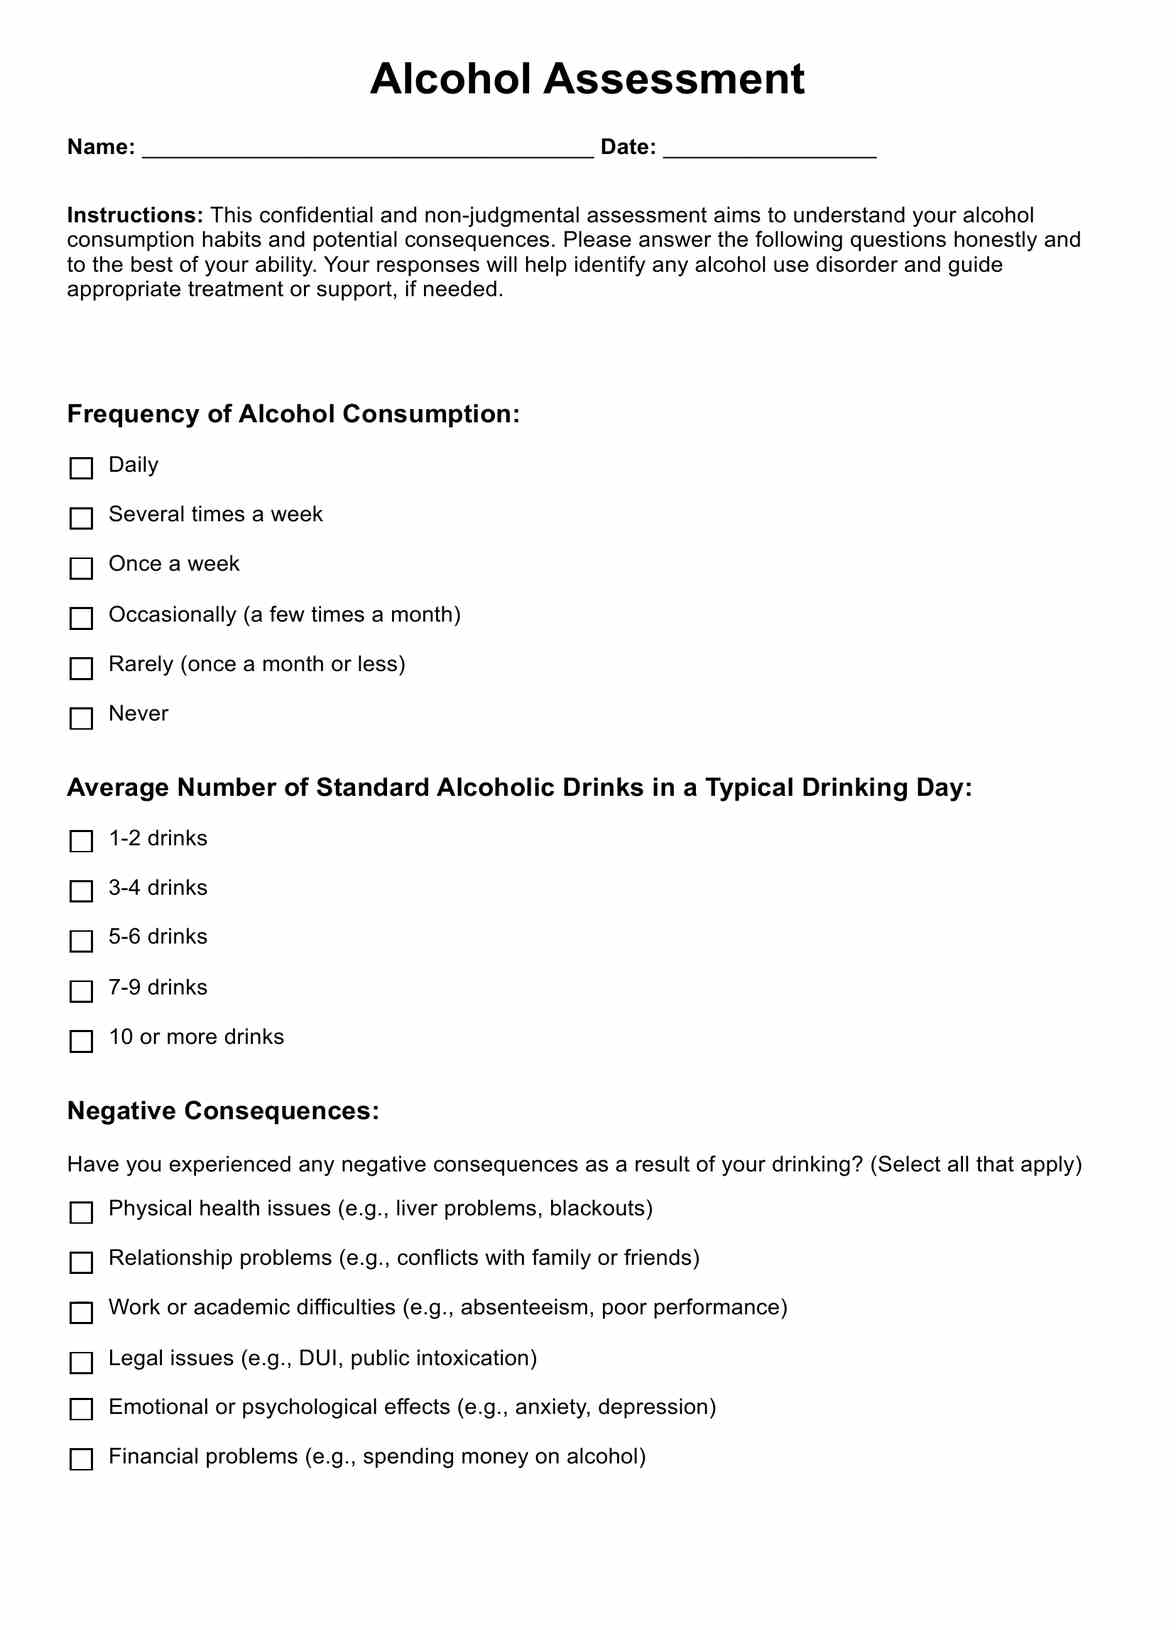 Alcohol Assessment PDF Example